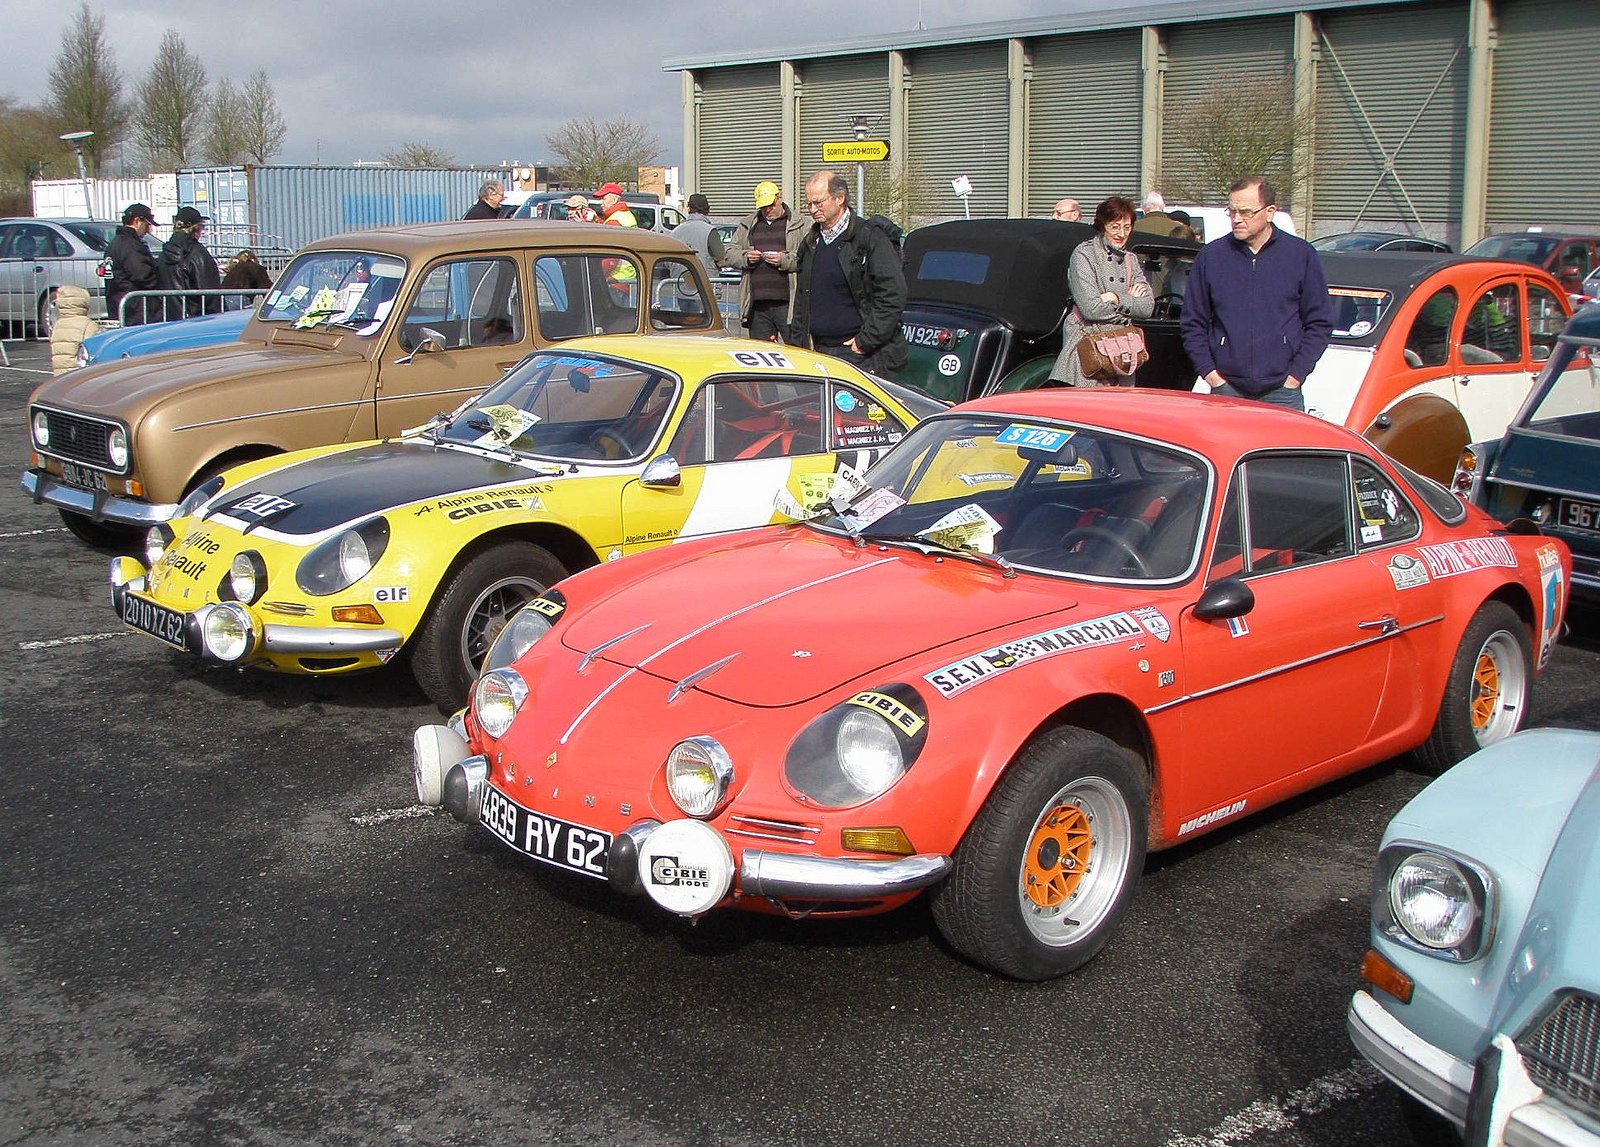 a110, Alpine, Classic, Renault, Berlinette, Cars, Rallycars, French, Coupe Wallpaper